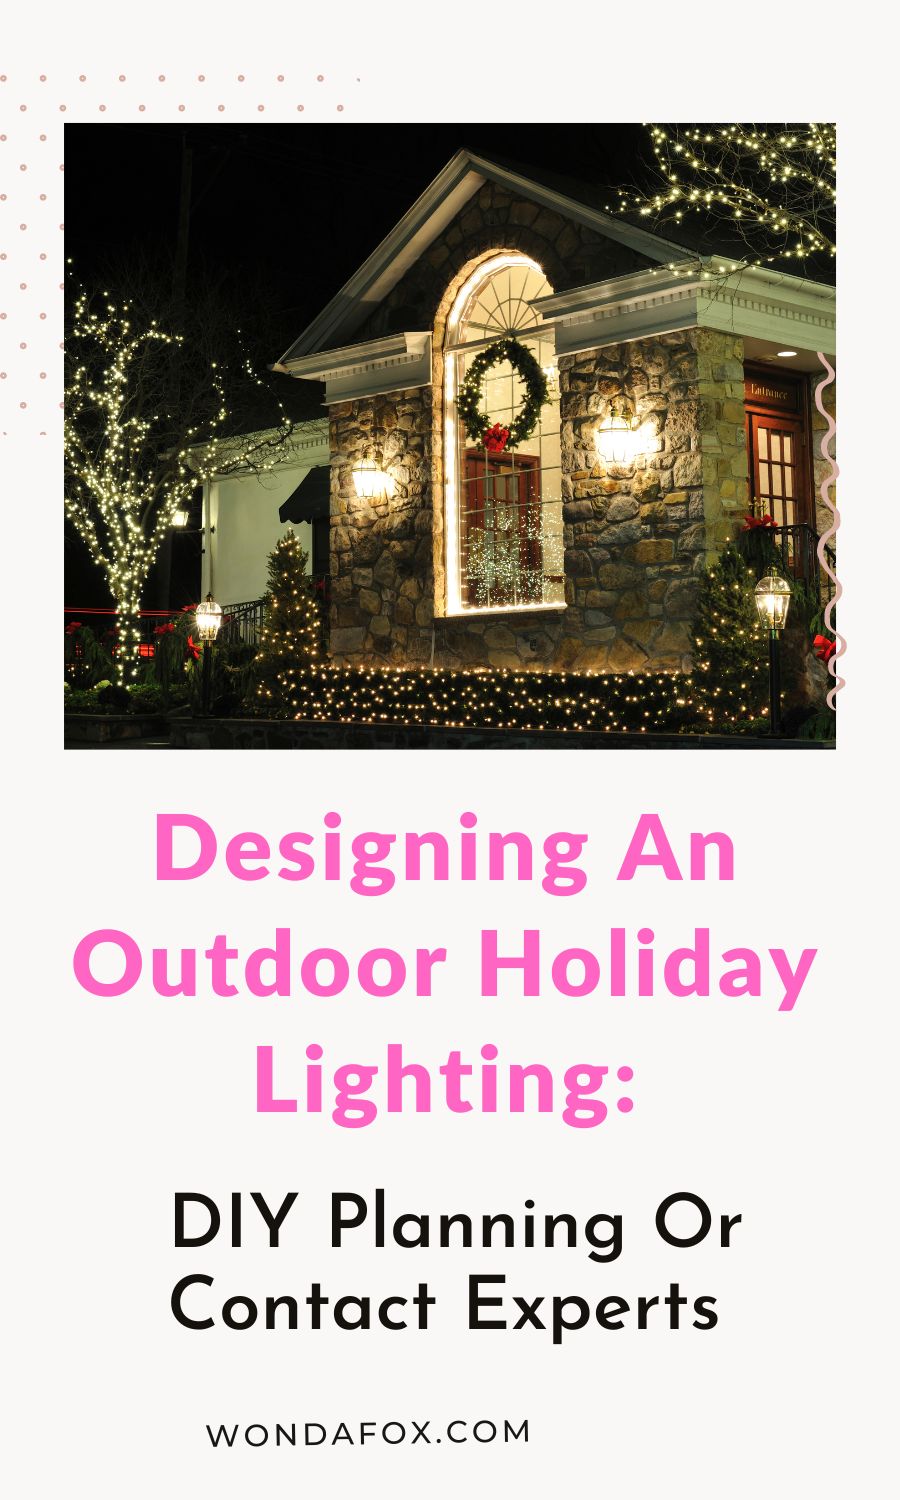 Designing An Outdoor Holiday Lighting: DIY Planning Or Contact Experts